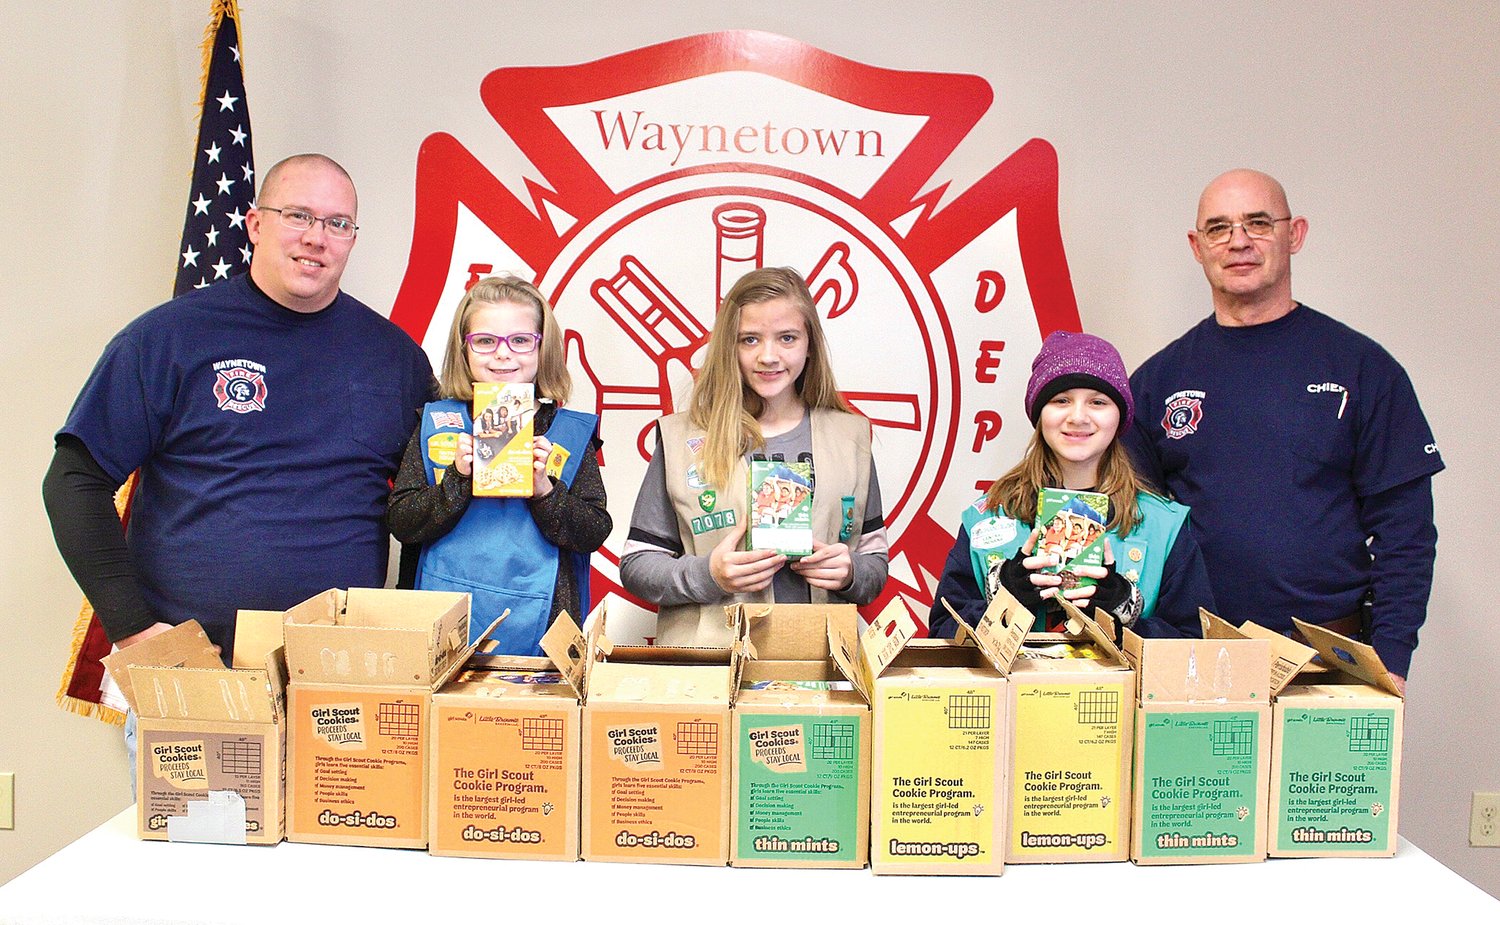 Waynetown Volunteer Firefighter Ryan Clevinger, left, and Fire Chief Phil Pirtle, right, stand with their Girl Scout partners Saturday before delivering $500 of Girl Scout cookies purchased by the department to elderly residents. Scouts riding along in the fire truck were Maiah Rathburn, from left, Lacie Bush and Elizabeth Ellingwood of Troop 57078 out of Crawfordsville.